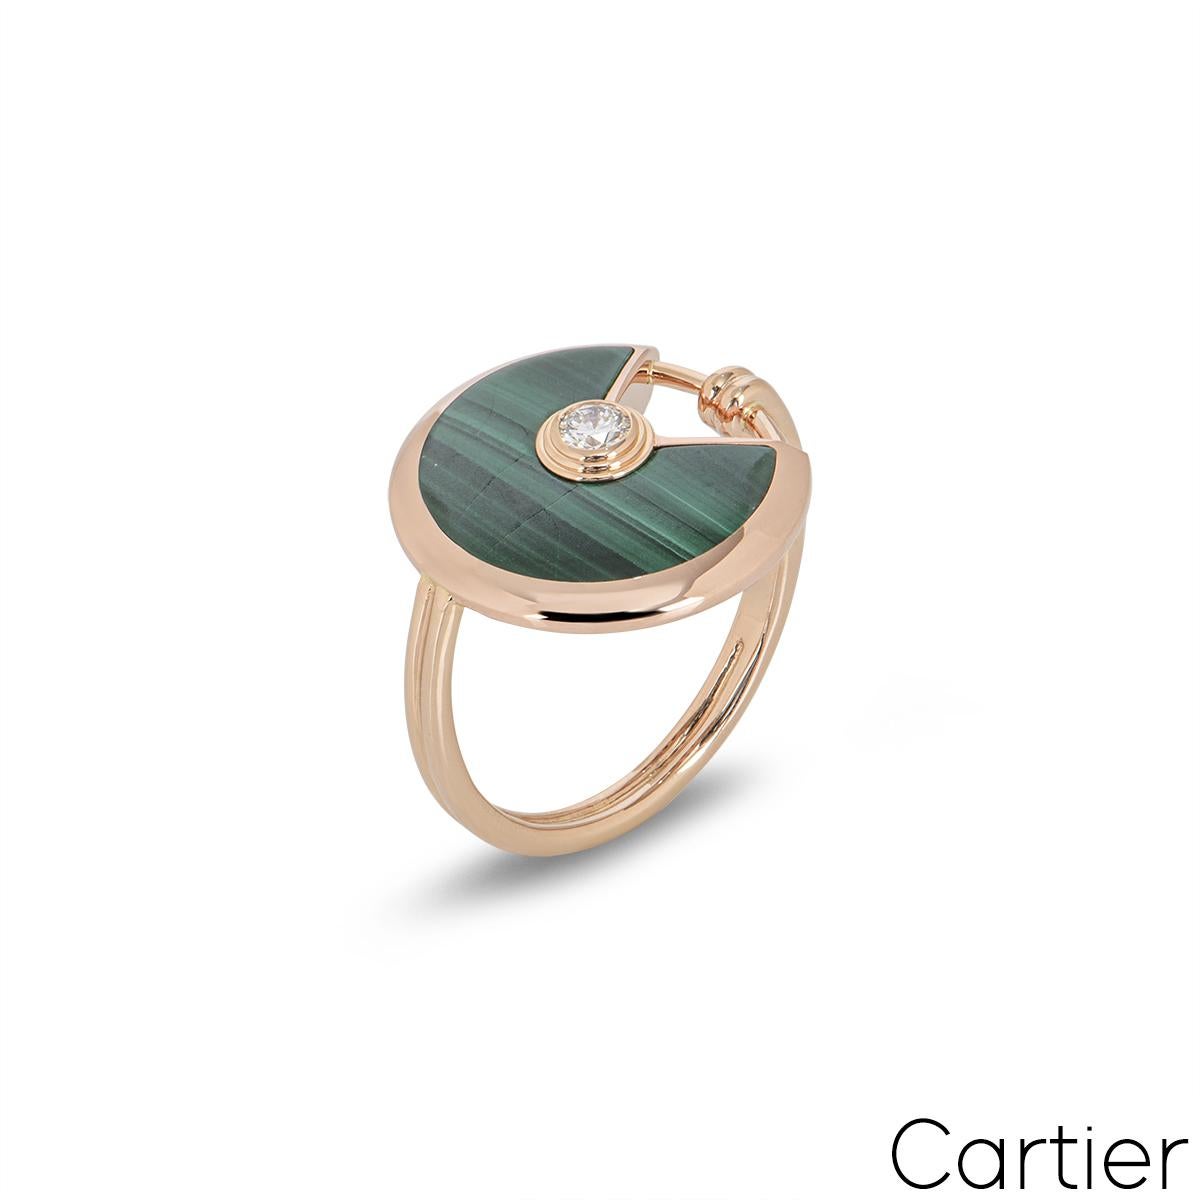 An 18k rose gold Cartier ring from the Amulette de Cartier collection. The ring comprises of a circular talisman, set with malachite and complemented by a single 0.09ct round brilliant cut diamond, in a rub over setting. The ring is a UK size M and